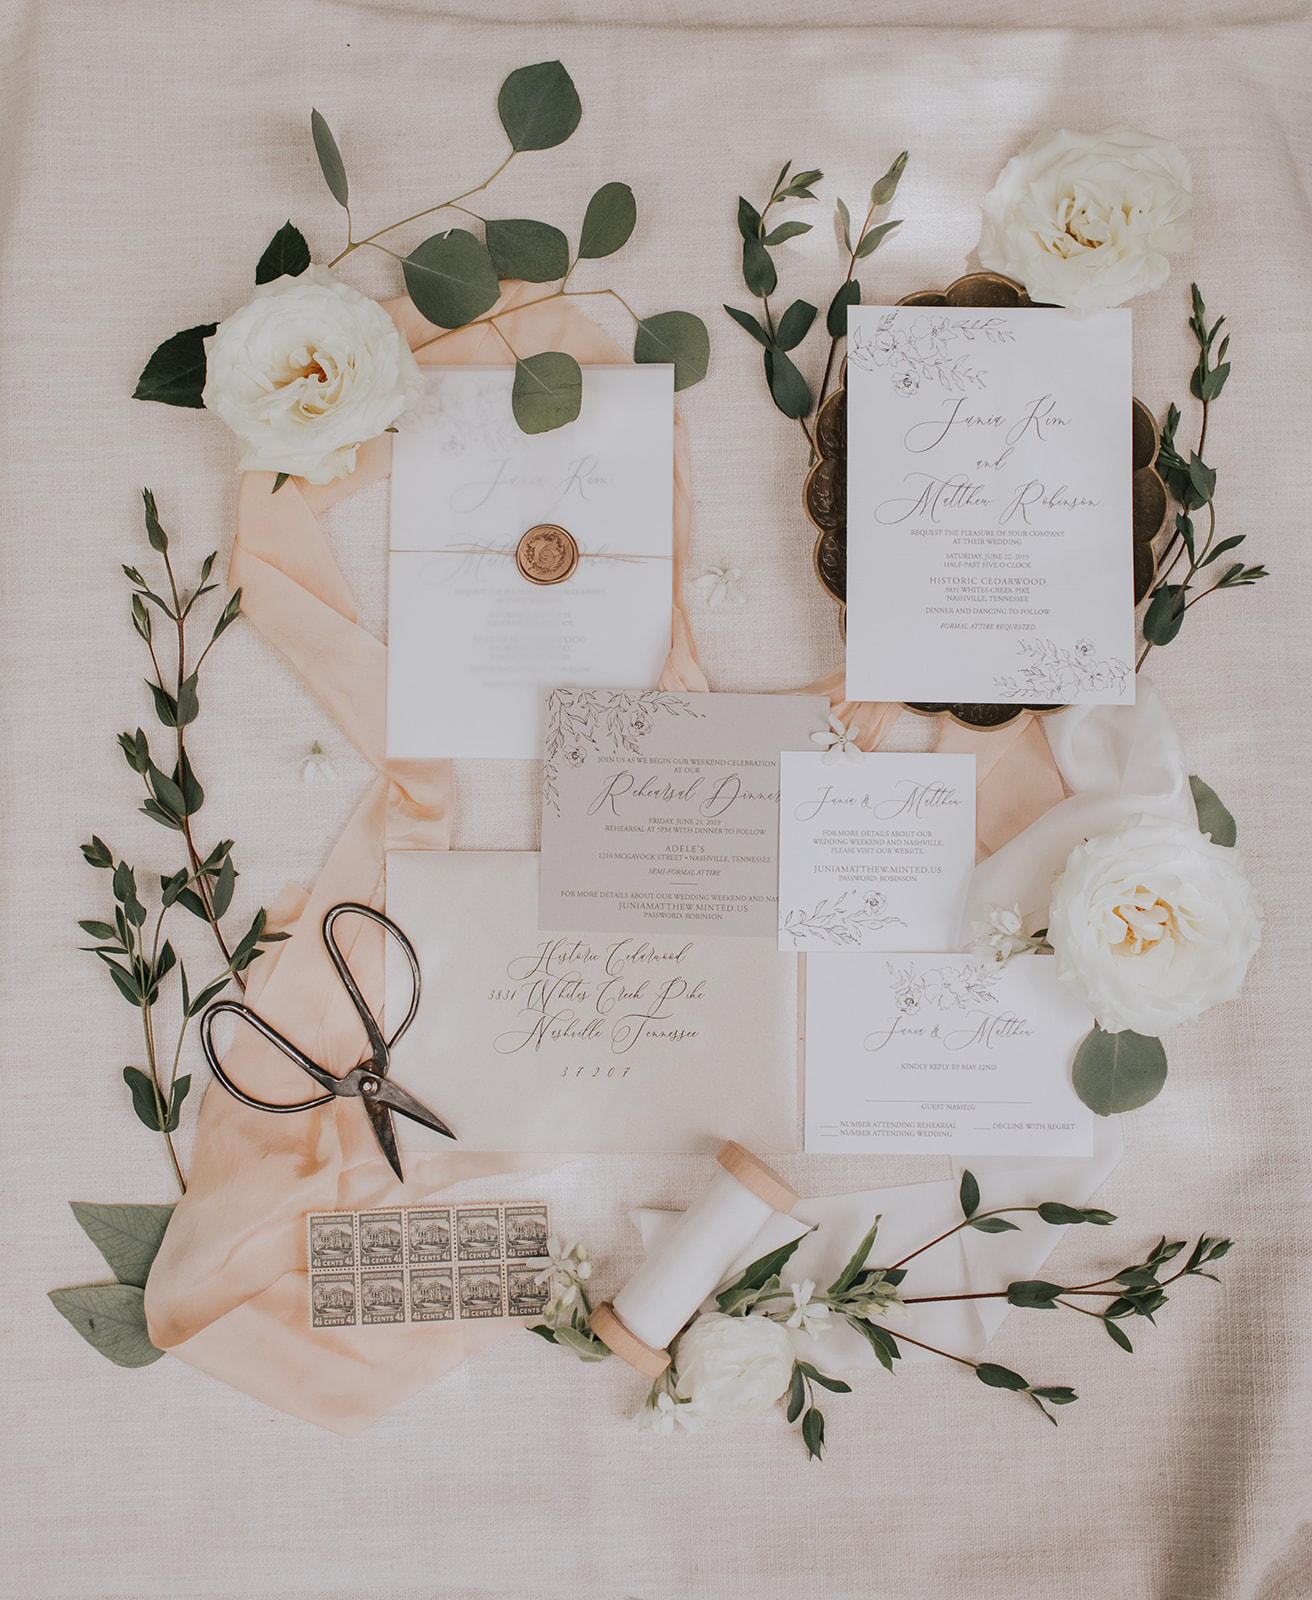 Designs In Paper Invitations: Summer Soiree at Cedarwood Weddings featured on Nashville Bride Guide